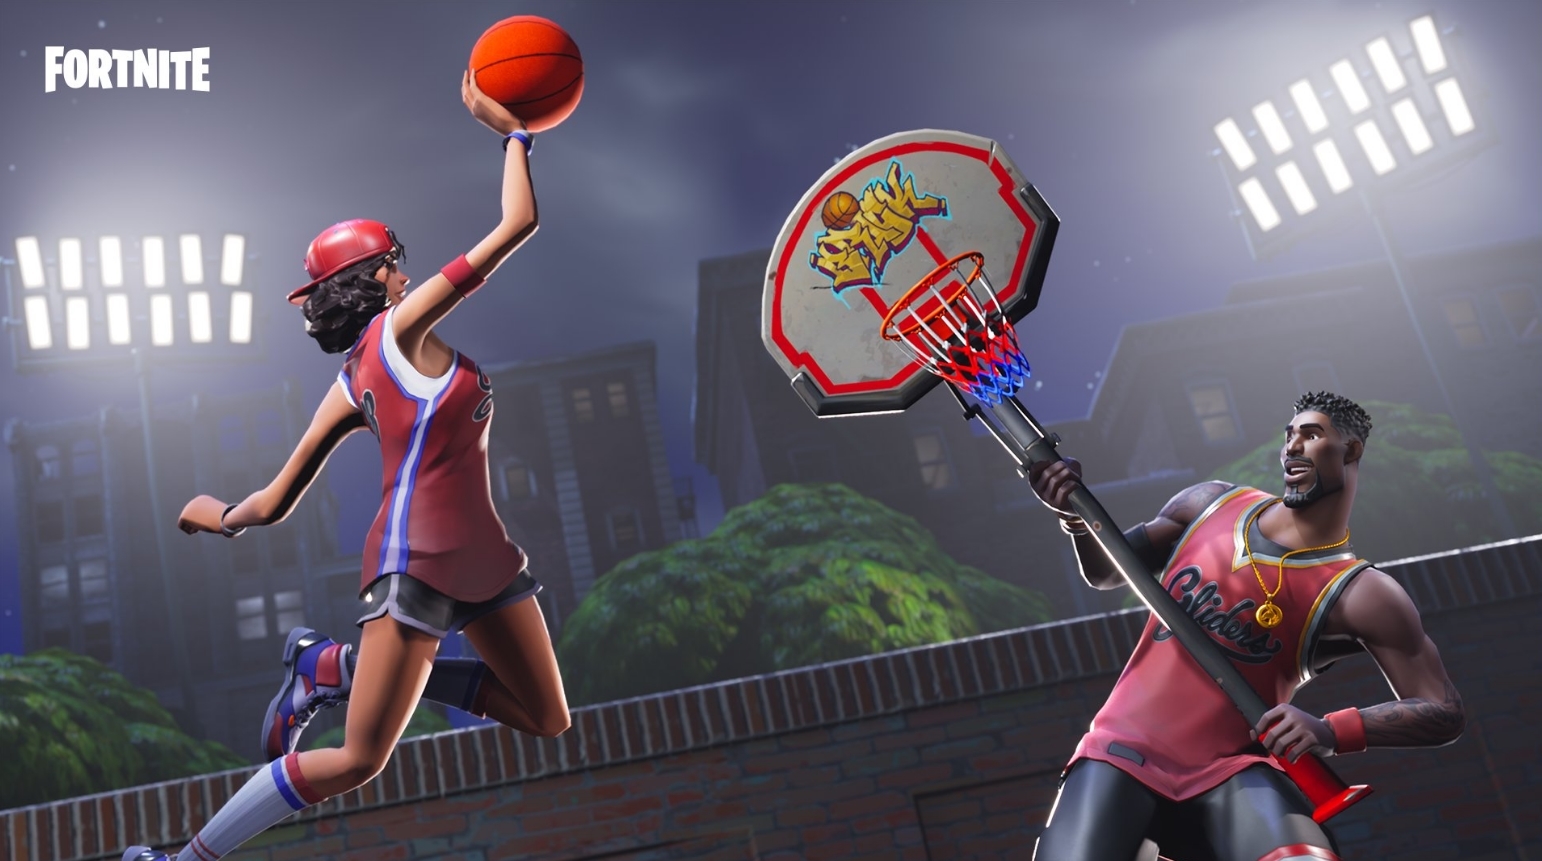 Where To Find All The Basketball Hoops In Fortnite Battle Royale - here s where to find basketball hoops in fortnite battle royale